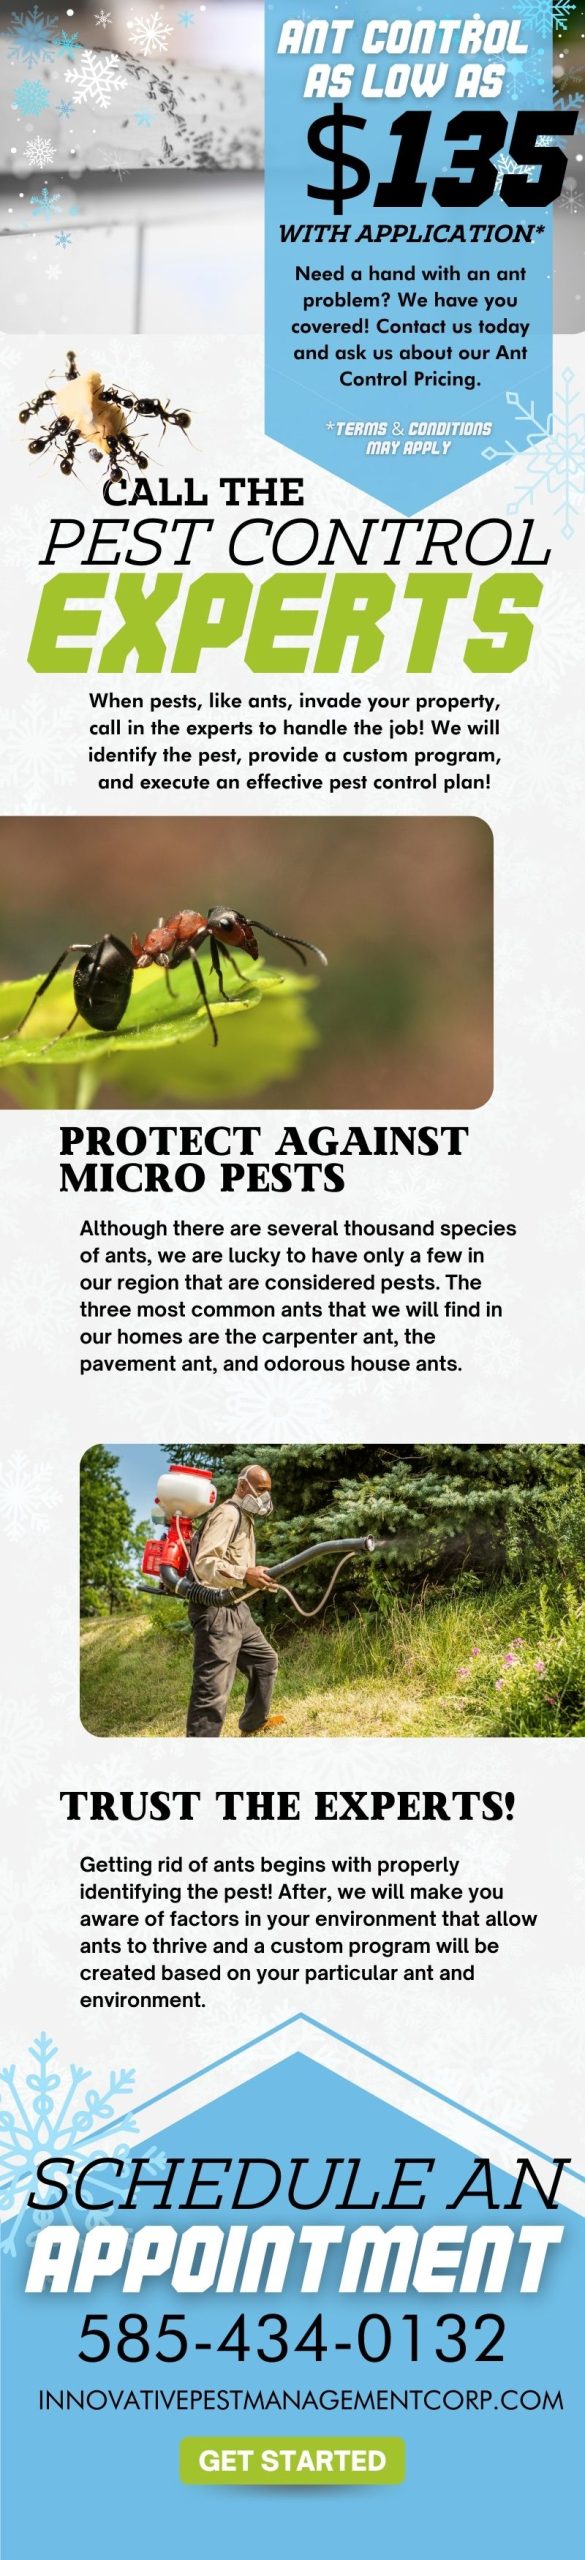 Call the Pest Control Experts! 3